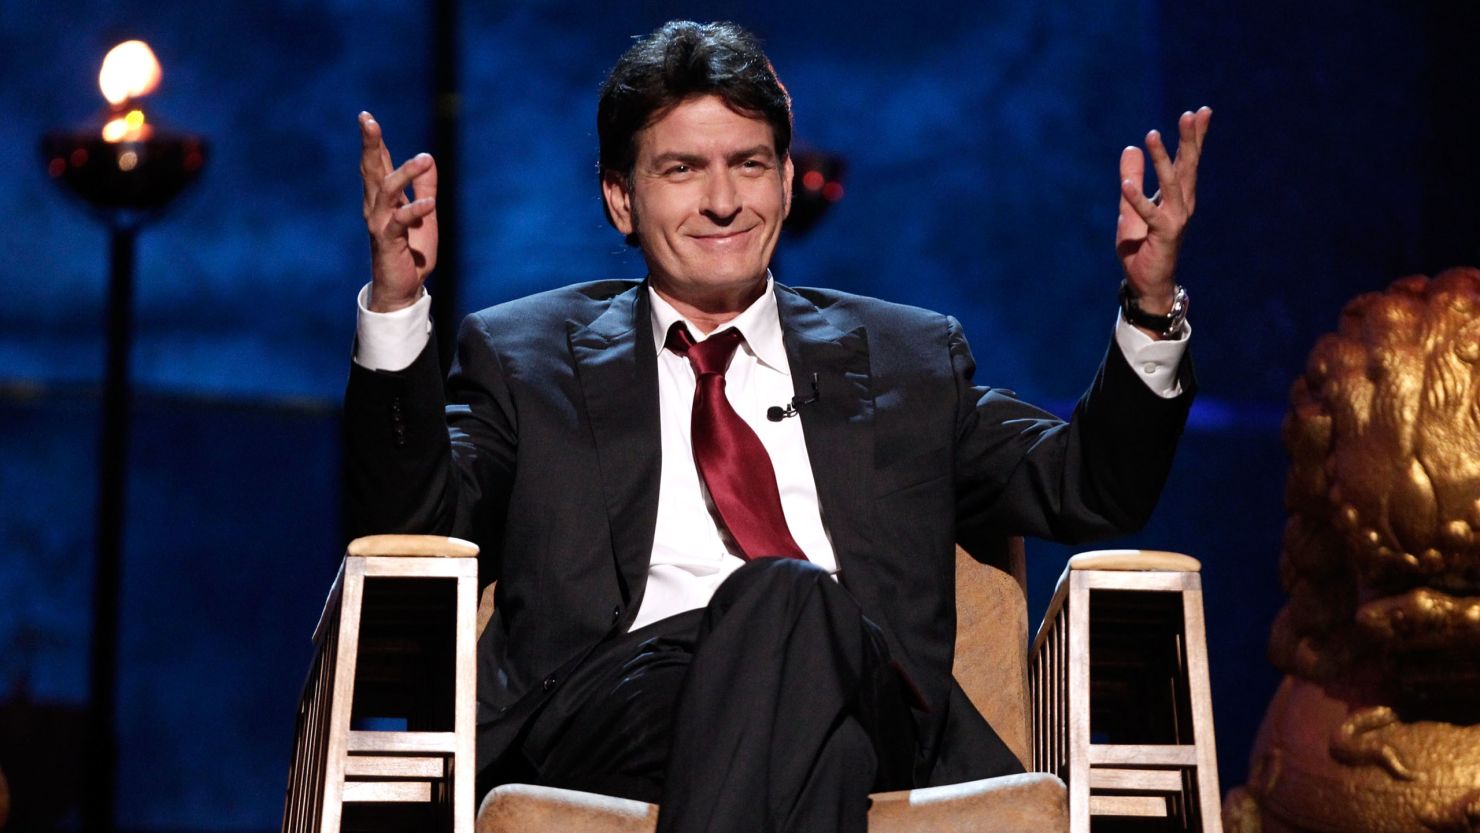 Charlie Sheen jumps into tiny tipping controversy, pledging $1,000 to the Philadelphia waiter who claims he was stiffed by NFL star LeSean McCoy.